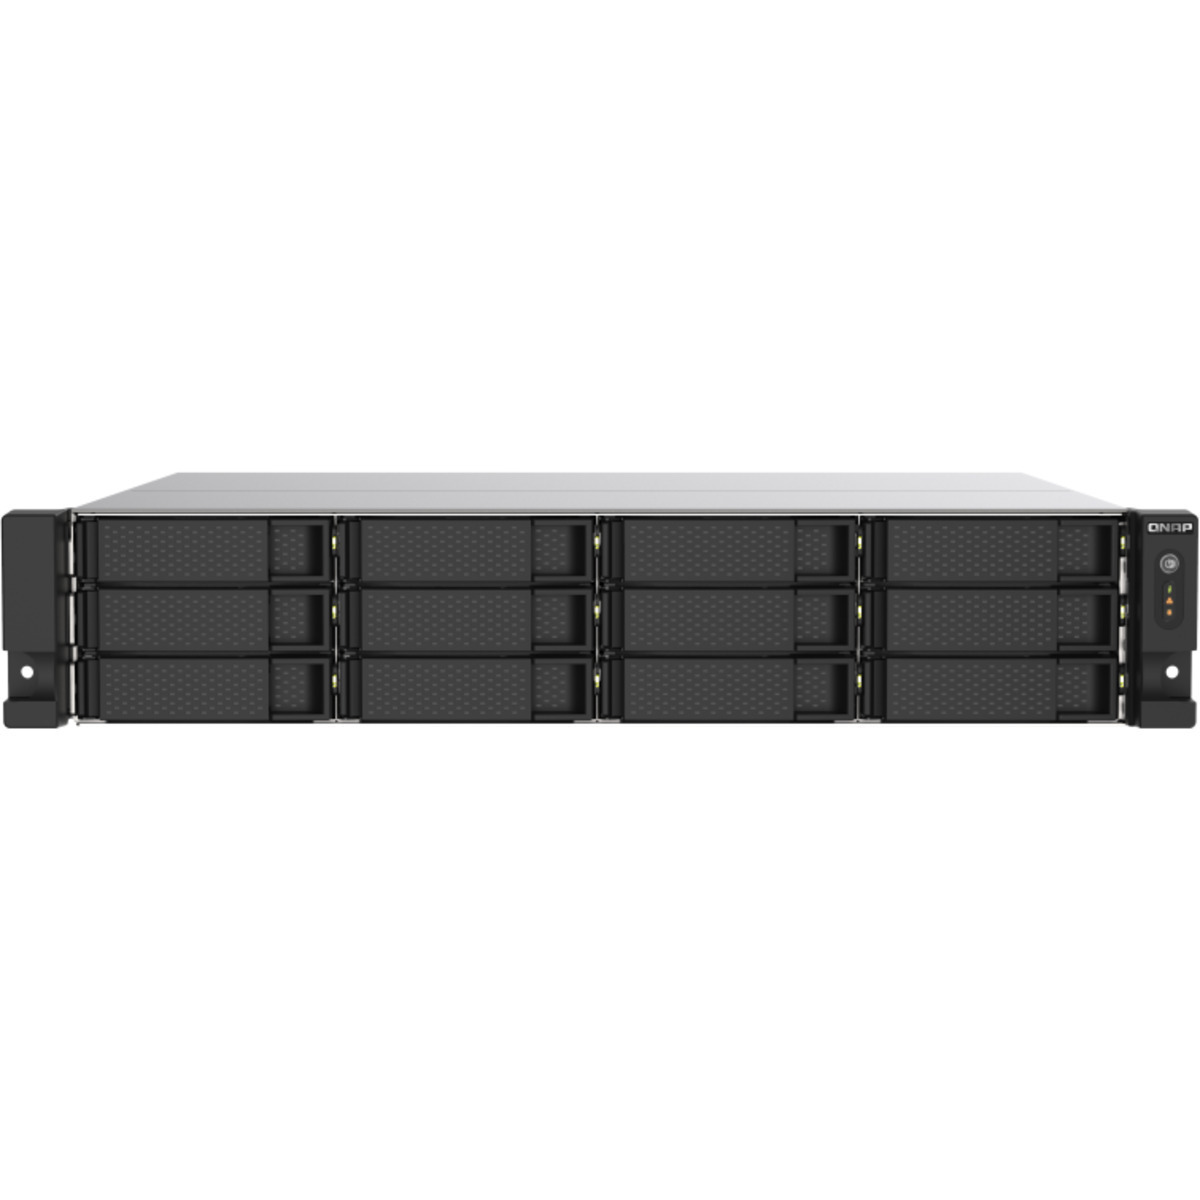 QNAP TS-1273AU-RP 162tb 12-Bay RackMount Multimedia / Power User / Business NAS - Network Attached Storage Device 9x18tb Western Digital Ultrastar DC HC550 WUH721818ALE6L4 3.5 7200rpm SATA 6Gb/s HDD ENTERPRISE Class Drives Installed - Burn-In Tested - FREE RAM UPGRADE TS-1273AU-RP